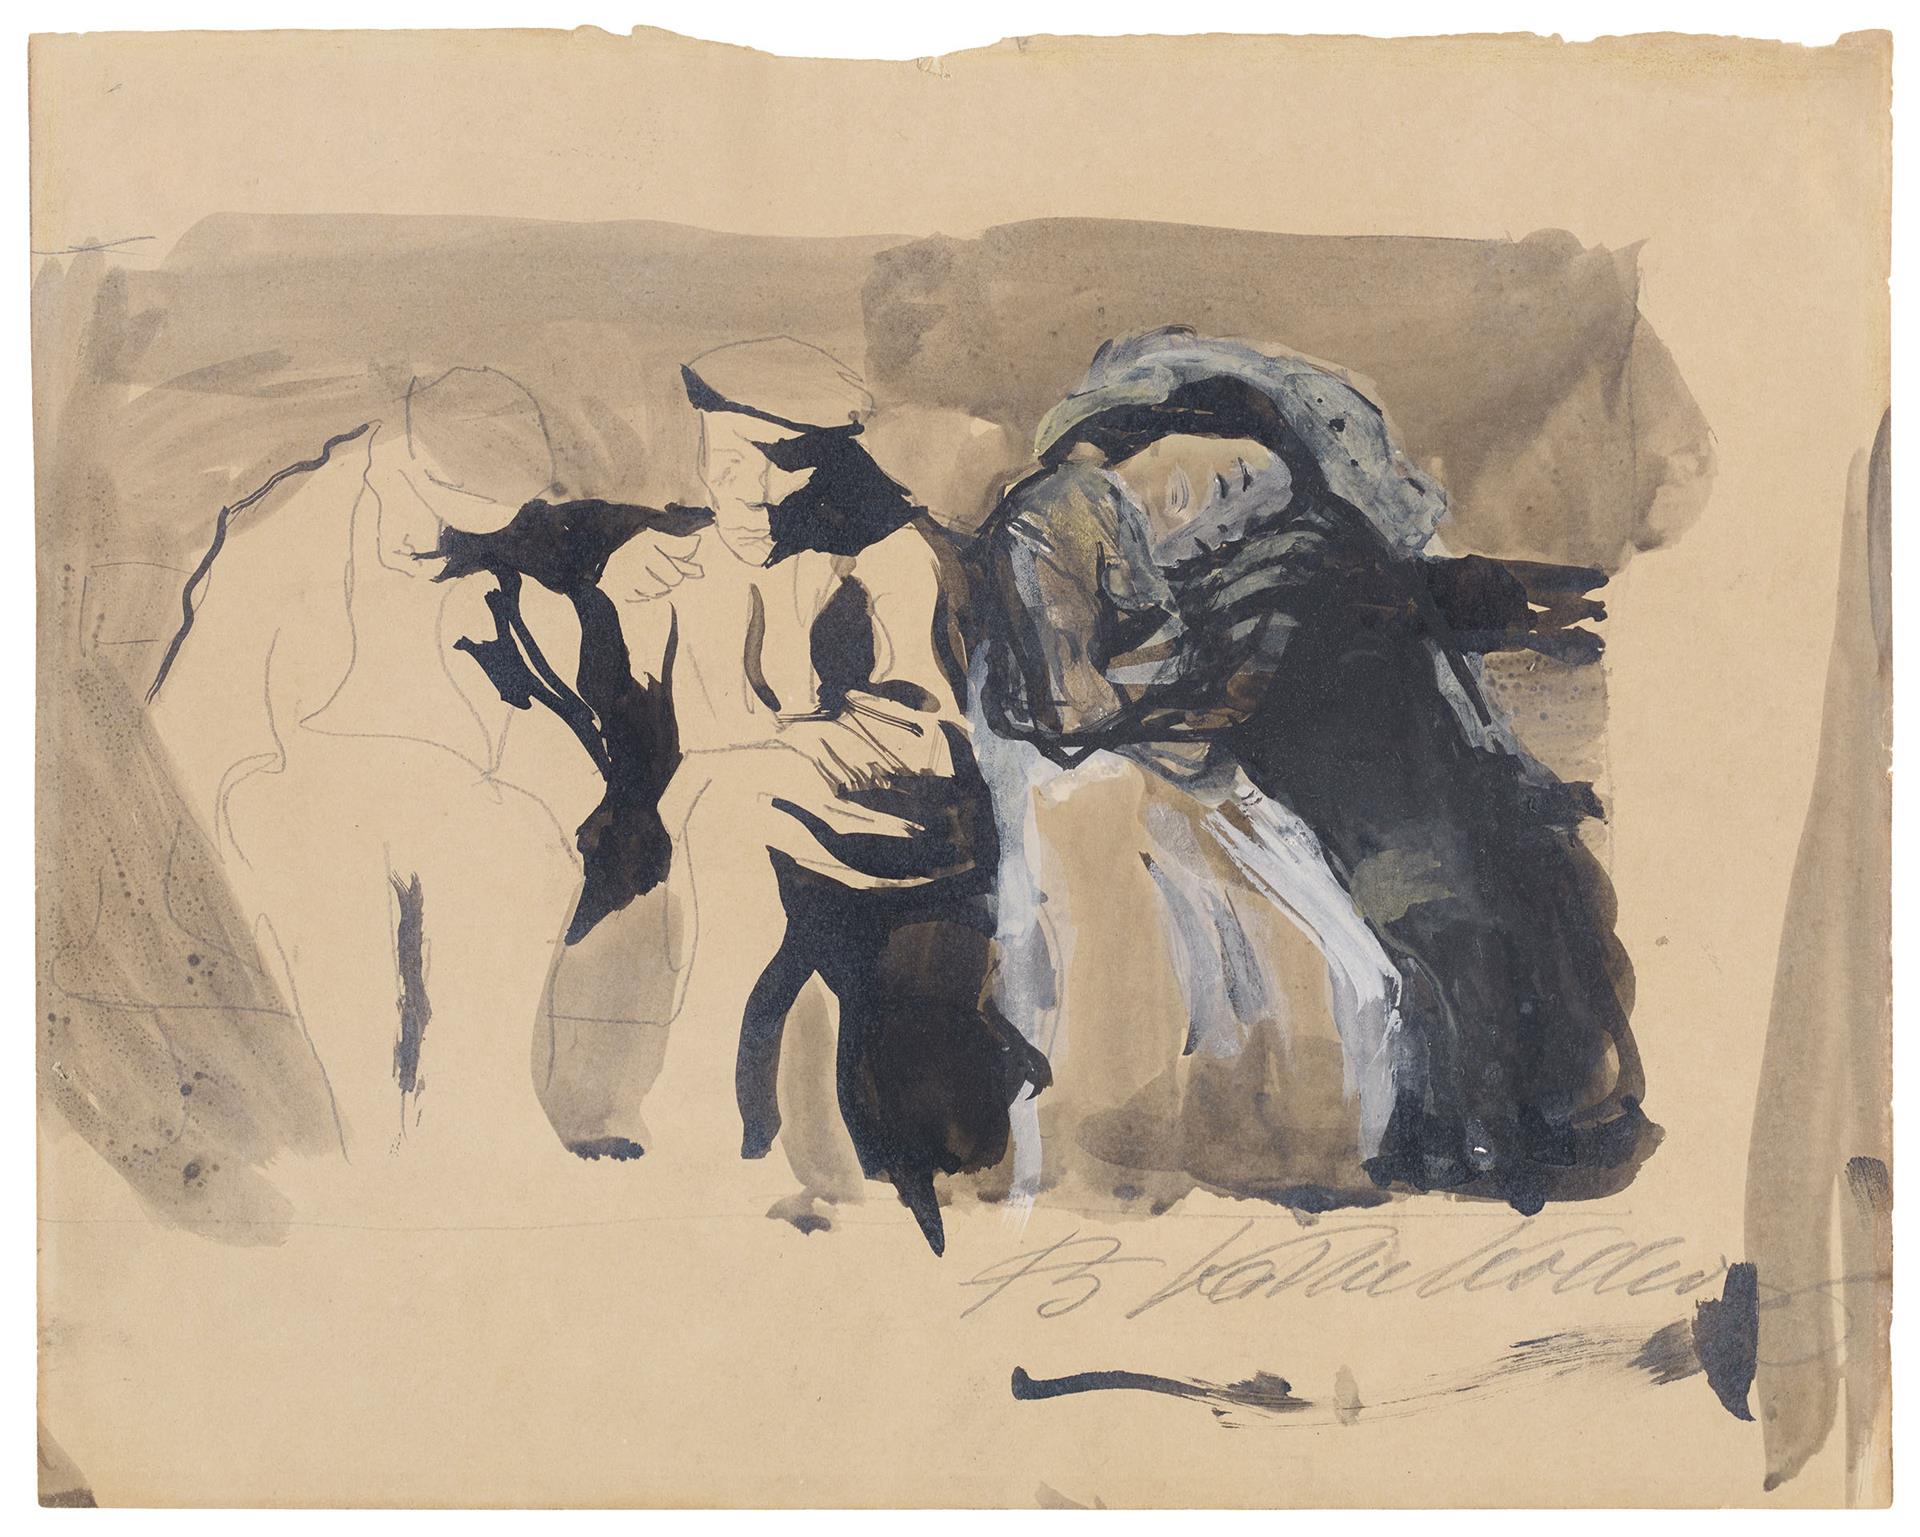 Käthe Kollwitz, Two Men and a Pair of Lovers on a Bench, 1904, graphite and ink, white highlights on cream-coloured paper, NT (287a), Cologne Kollwitz Collection © Käthe Kollwitz Museum Köln